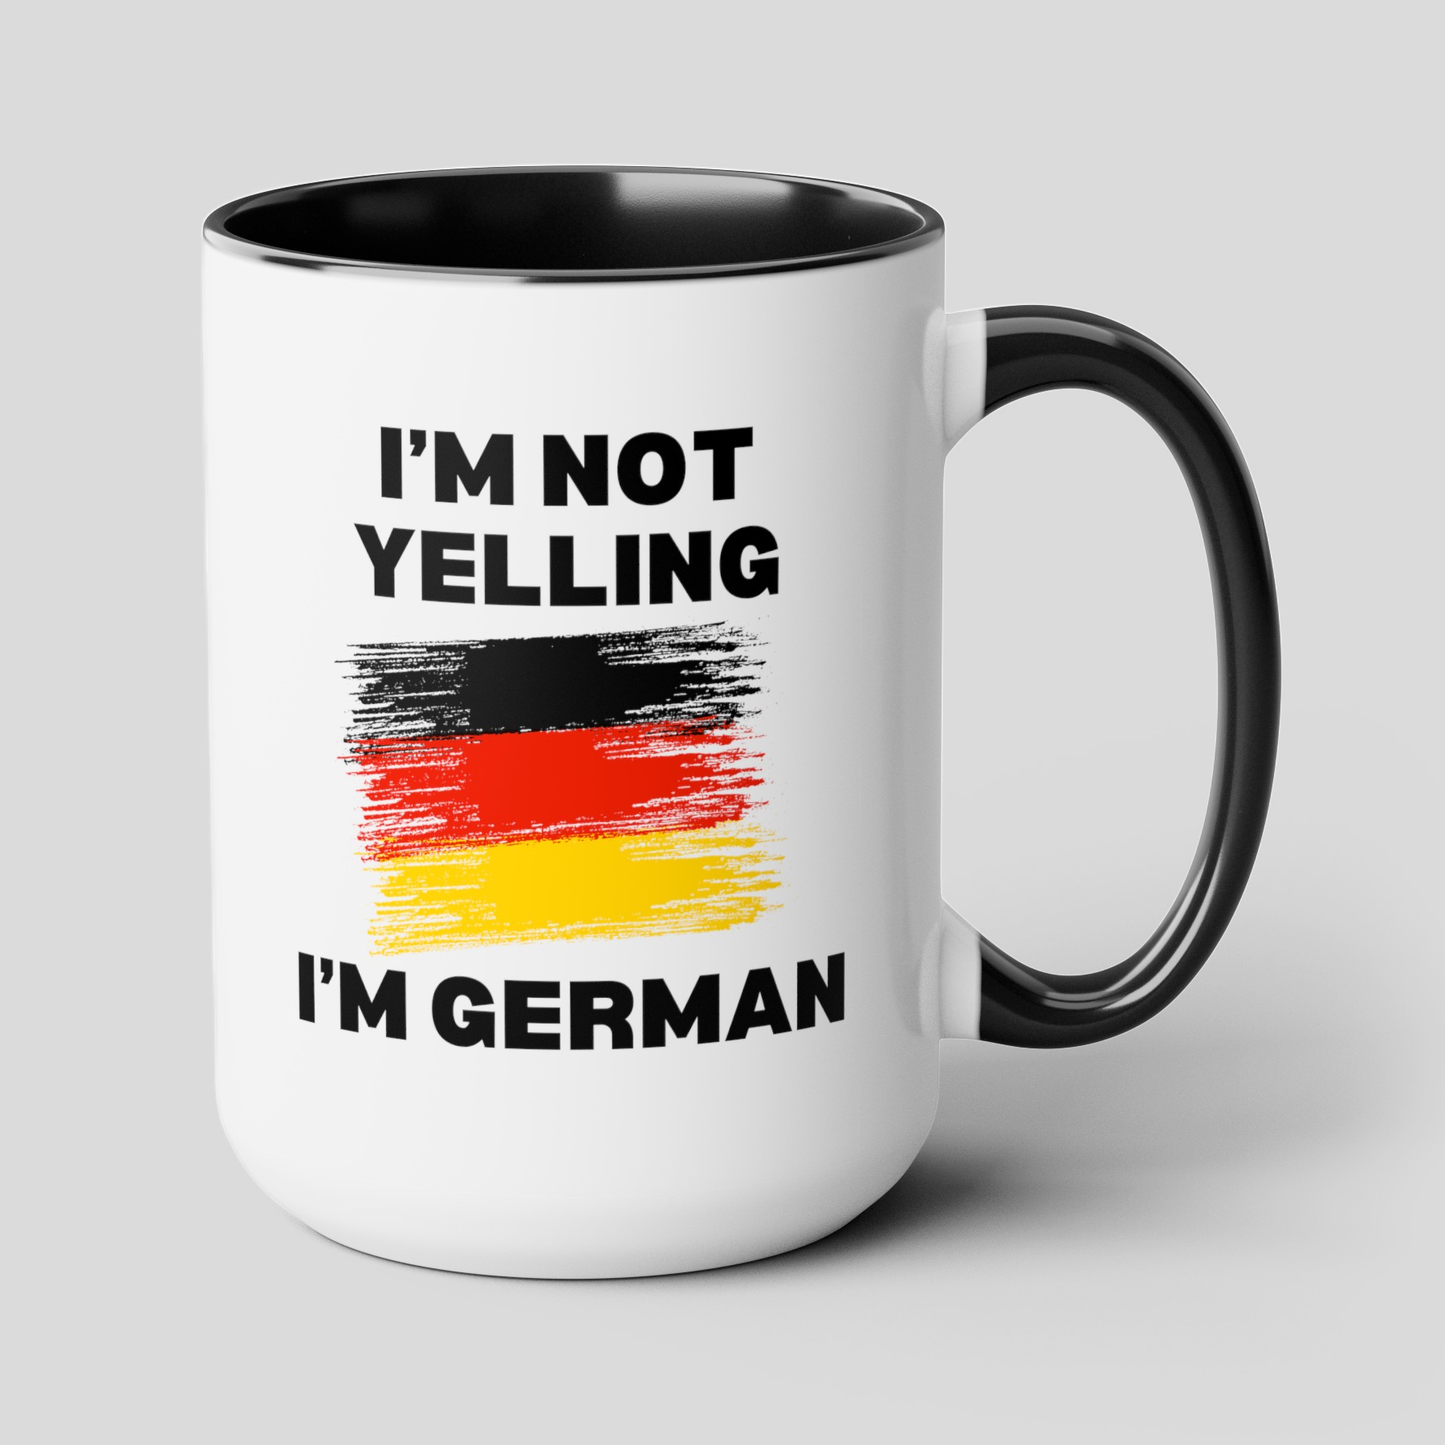 I'm Not Yelling I'm German 15oz white with black accent funny large coffee mug gift for deutsch friend flag germany deutschland birthday waveywares wavey wares wavywares wavy wares cover